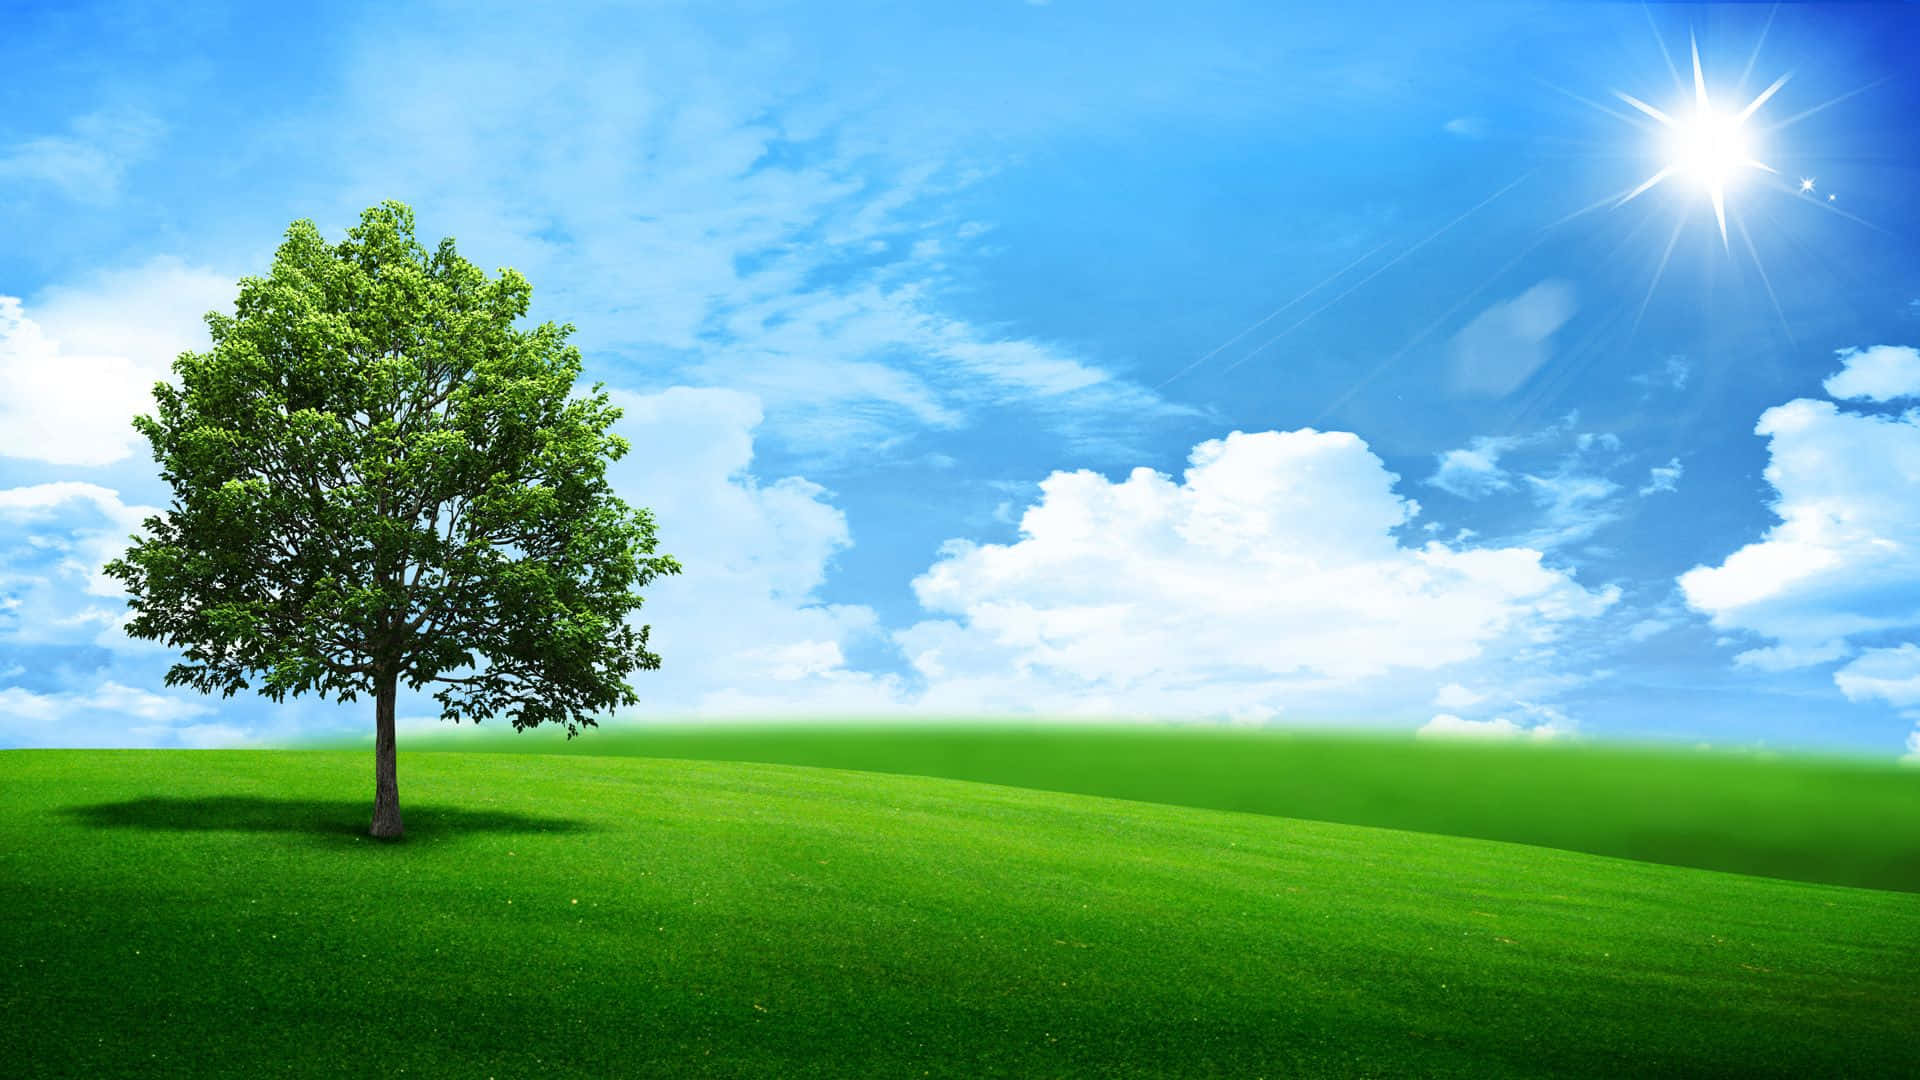 A Vibrant Green Landscape Basking in Nature's Beauty Wallpaper